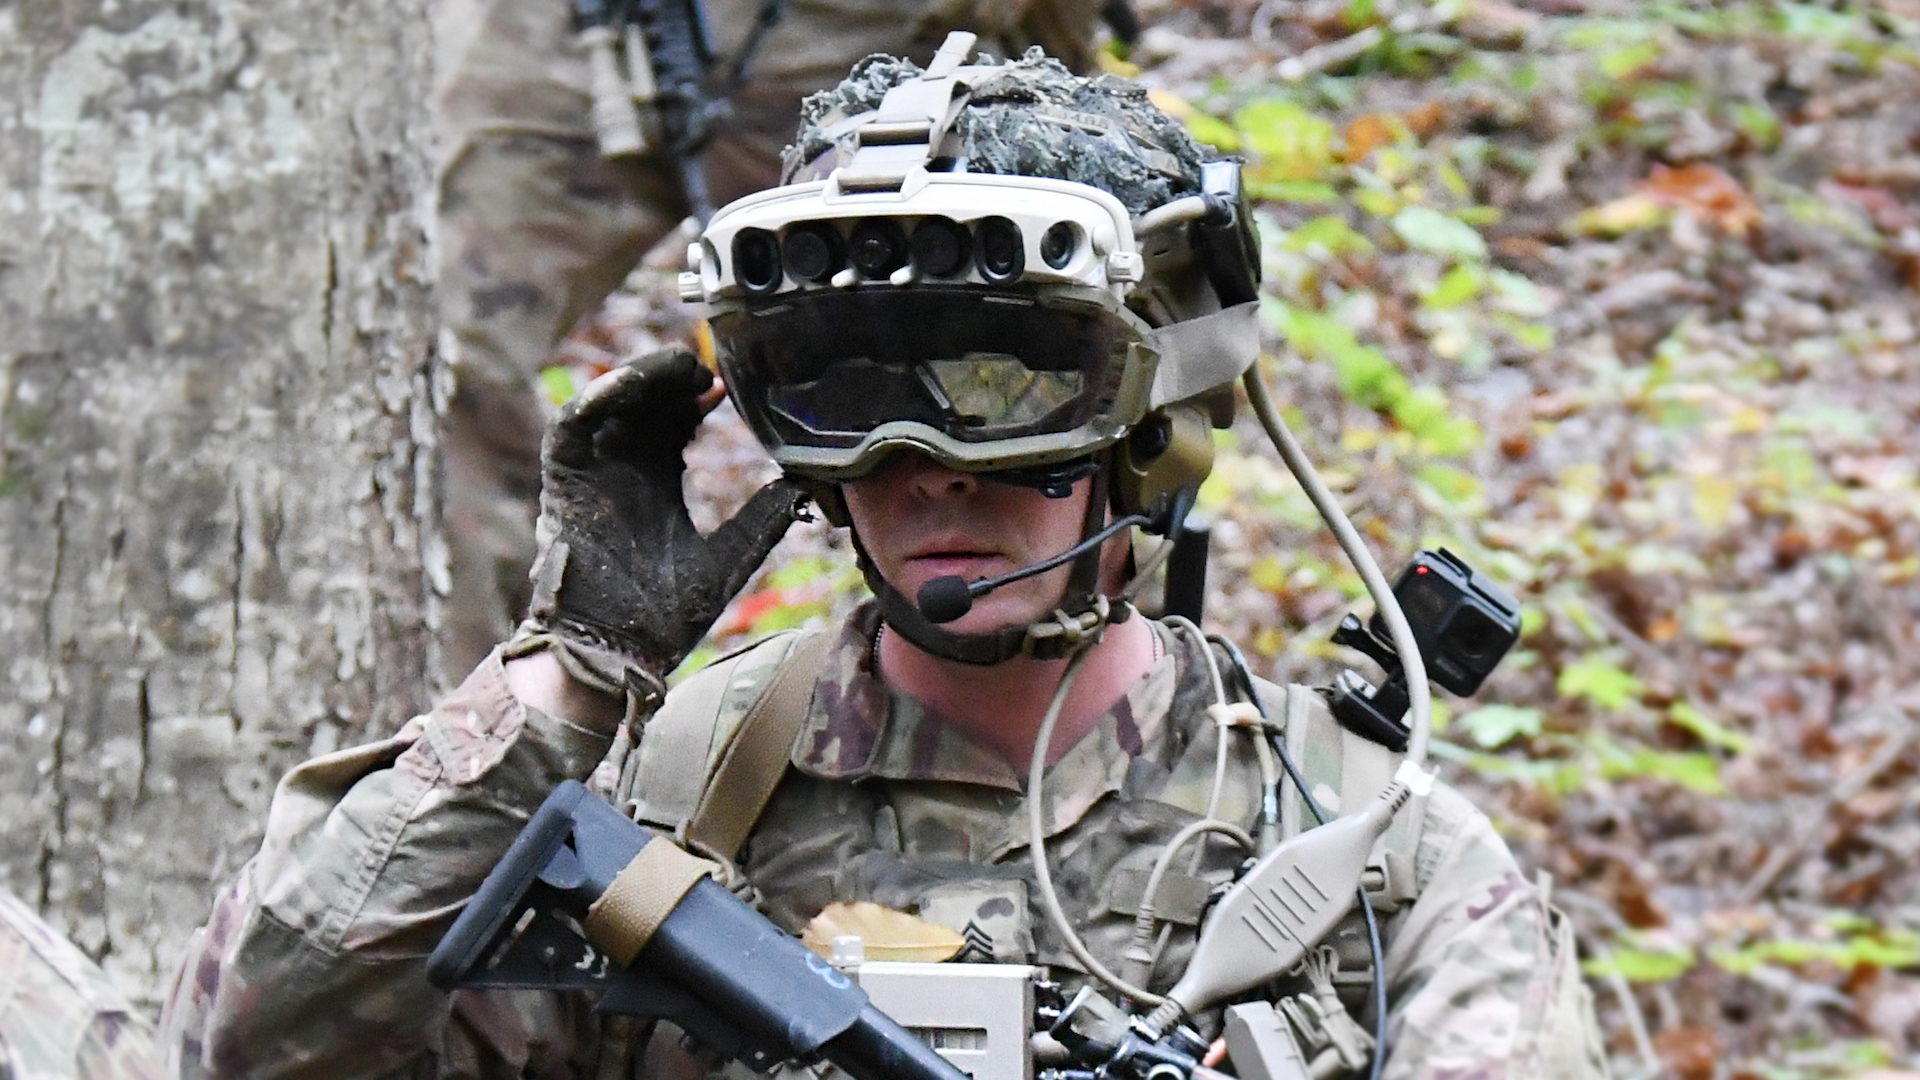 The Army’s futuristic new goggles are a literal pain in the neck